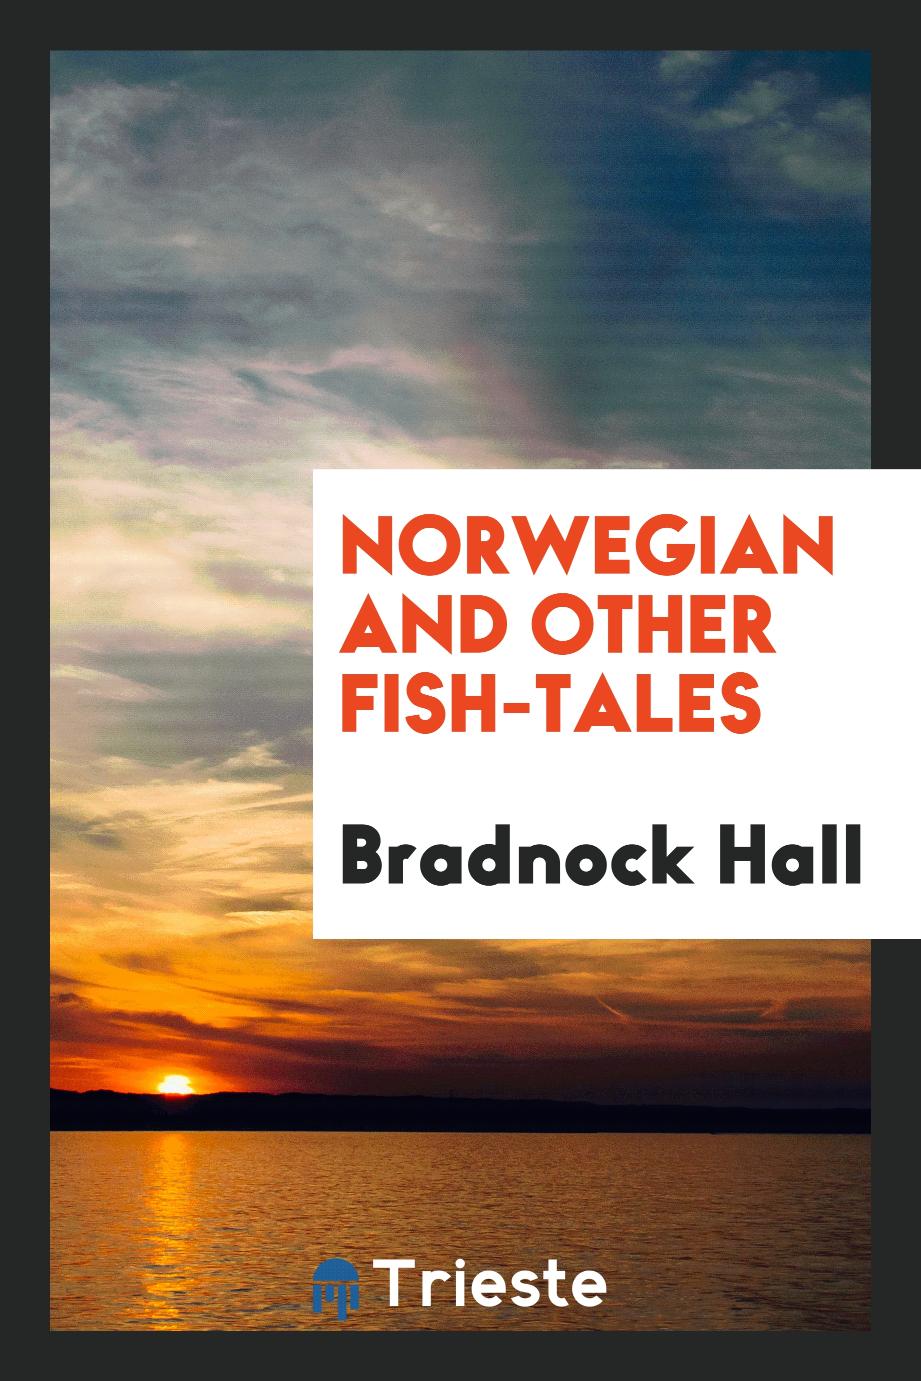 Norwegian and other fish-tales